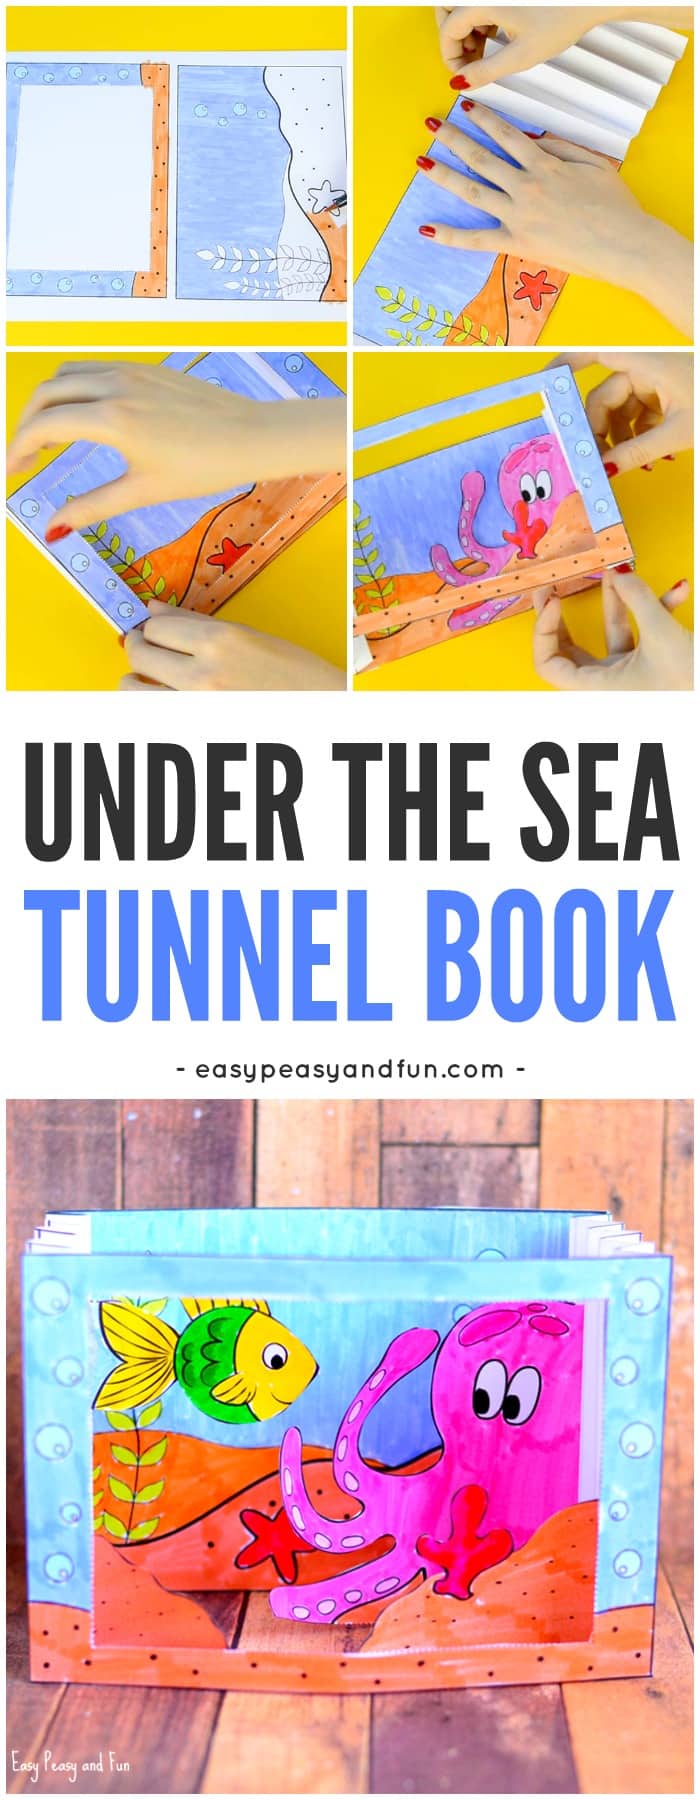 Printable Under the Sea Tunnel Book Craft for Kids